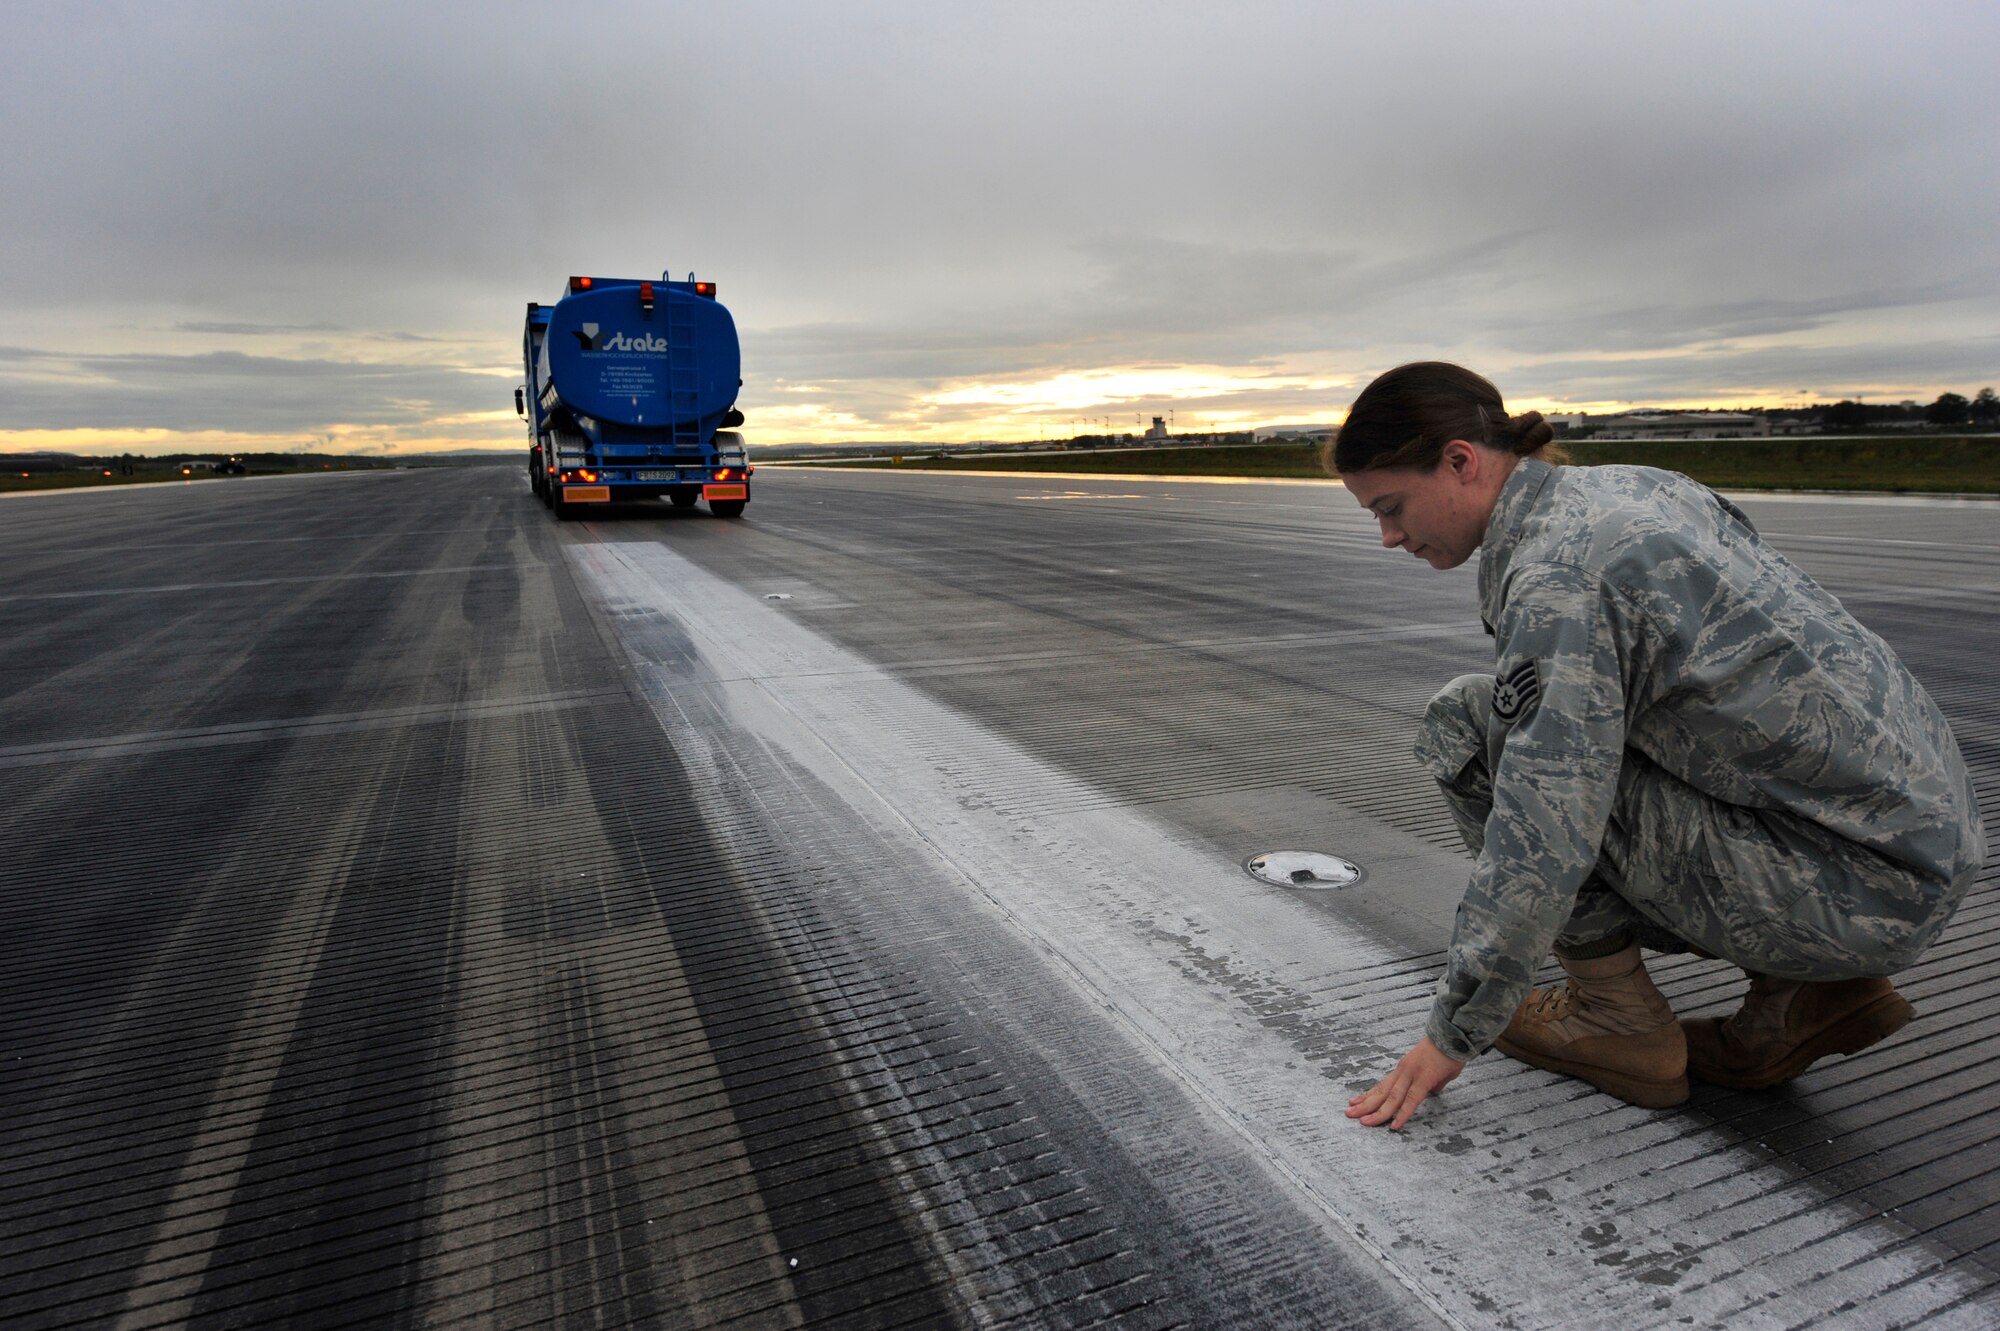 Staff Sgt. Stephanie Heck, Airfield Management Operations NCOIC, checks the amount of rubber and paint removed from the runway after the Wasserhochdrucktechnick makes its first pass, July 19, 2011, Ramstein Air Base, Germany.  Contractors from Strate Wasserhochdrucktechnick e.K removed excess rubber from various parts of the runways to prevent aircraft from sliding when they land.  The weeklong project cost $91K.  (U.S. Air Force Photo by Tech. Sgt. Chenzira Mallory)